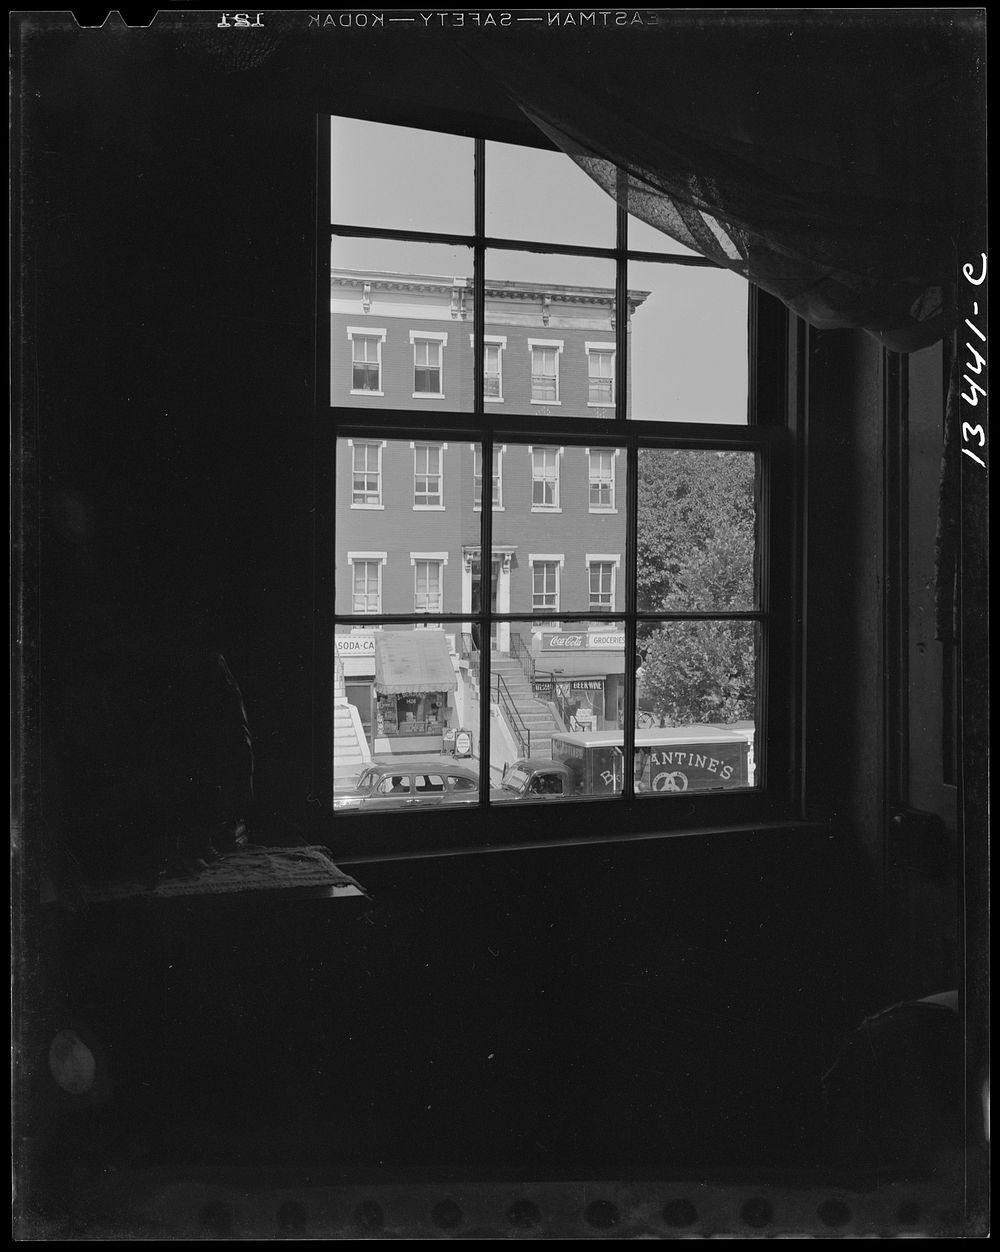 Washington, D.C. View from the bedroom window of Mrs. Ella Watson, a government worker. Sourced from the Library of Congress.